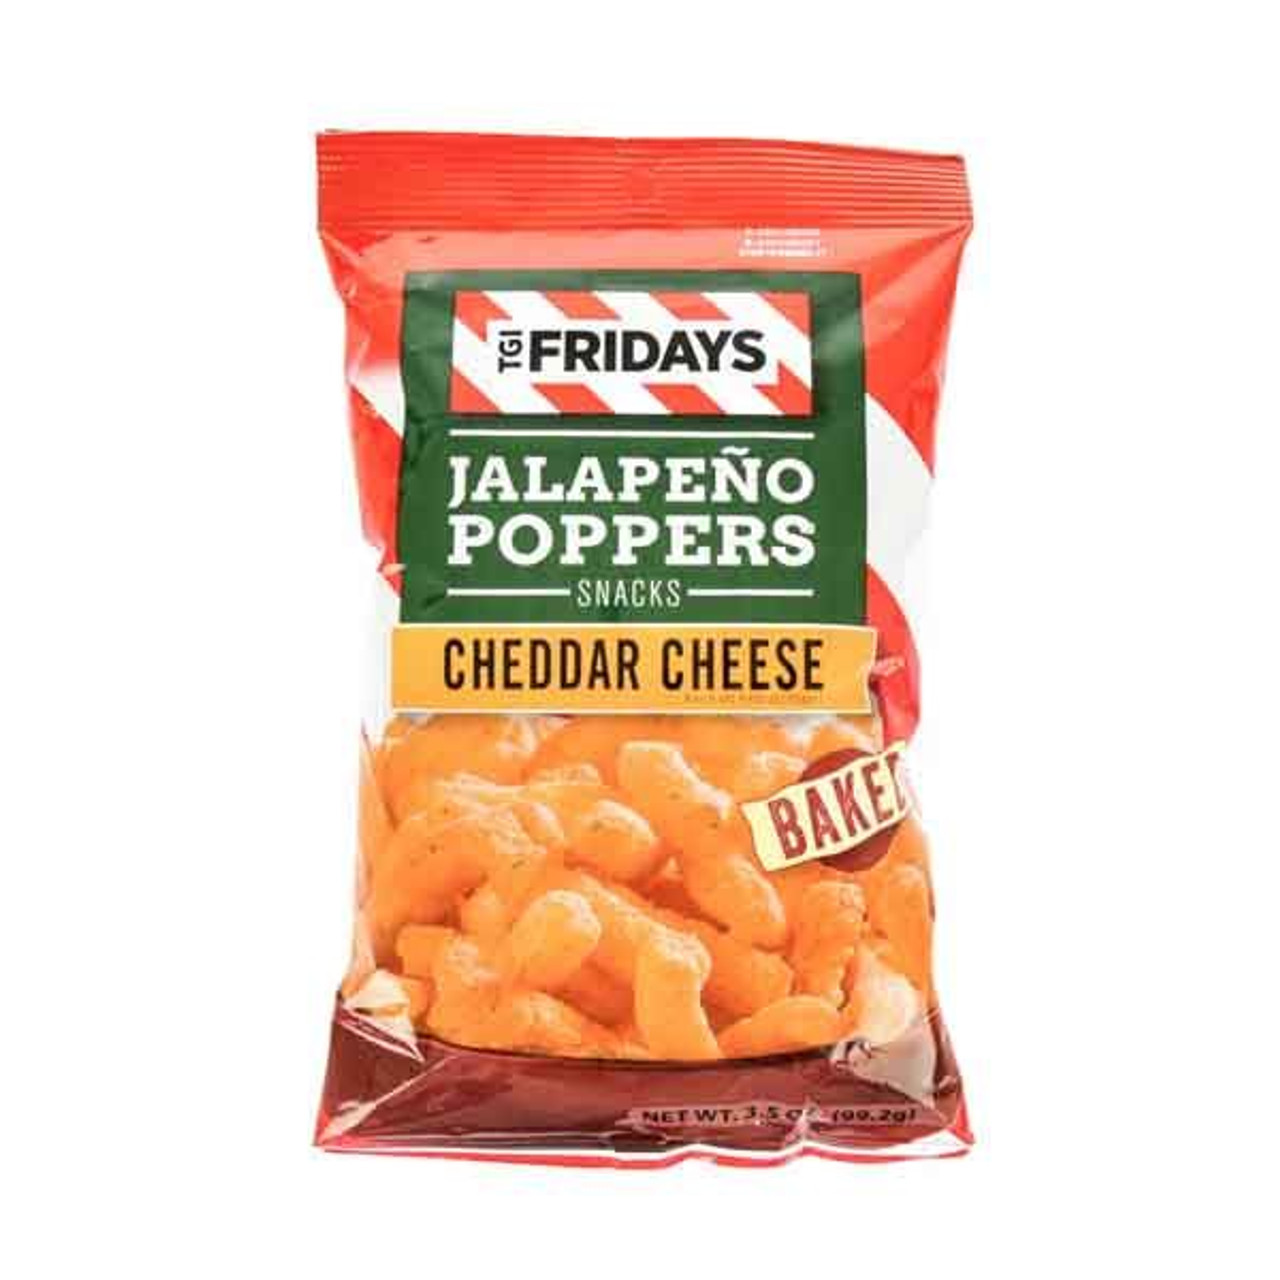 Tgi Fridays Cheddar Cheese Jalapeno Poppers 99g 